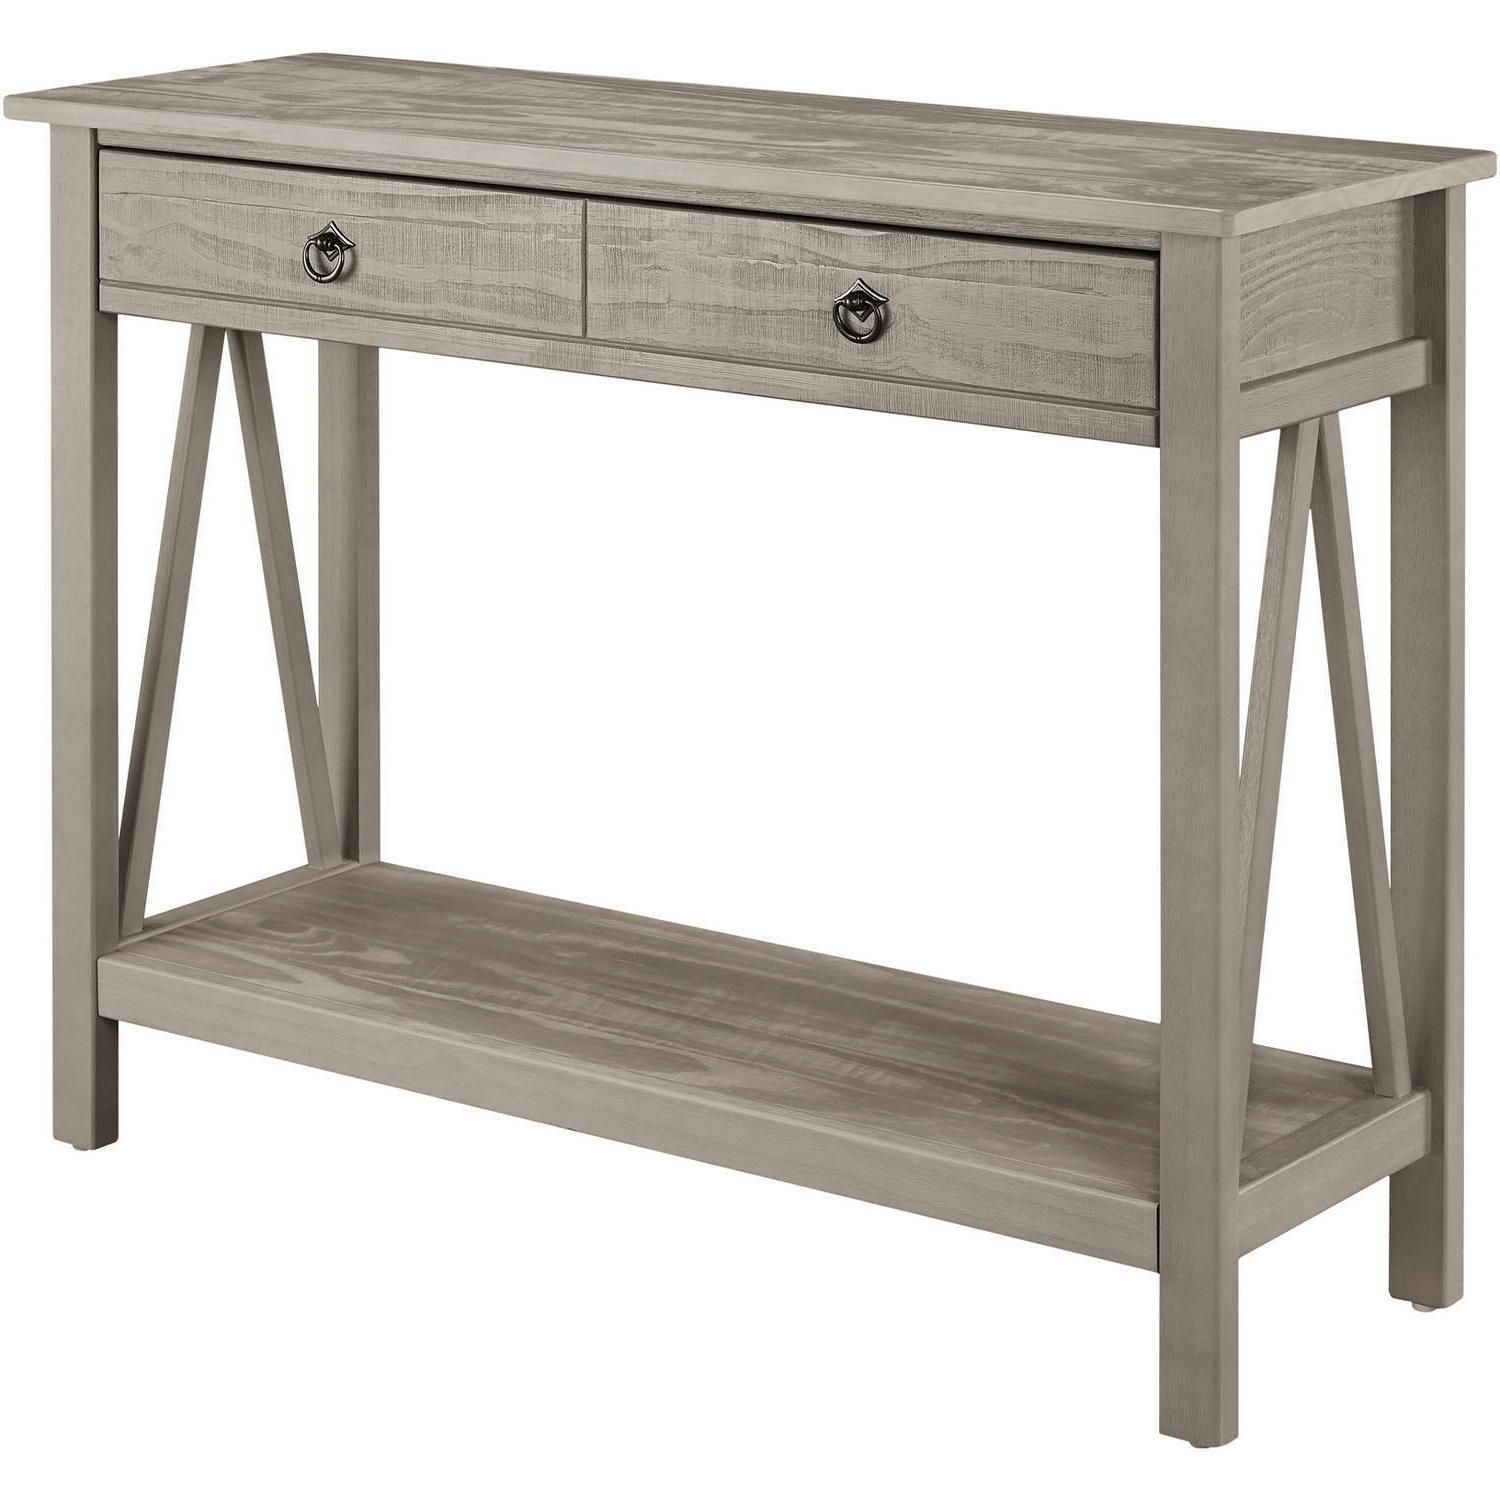 Console Table In Rustic Woodgrain Gray Finish Sof Pertaining To Rustic Bronze Patina Console Tables (View 2 of 20)